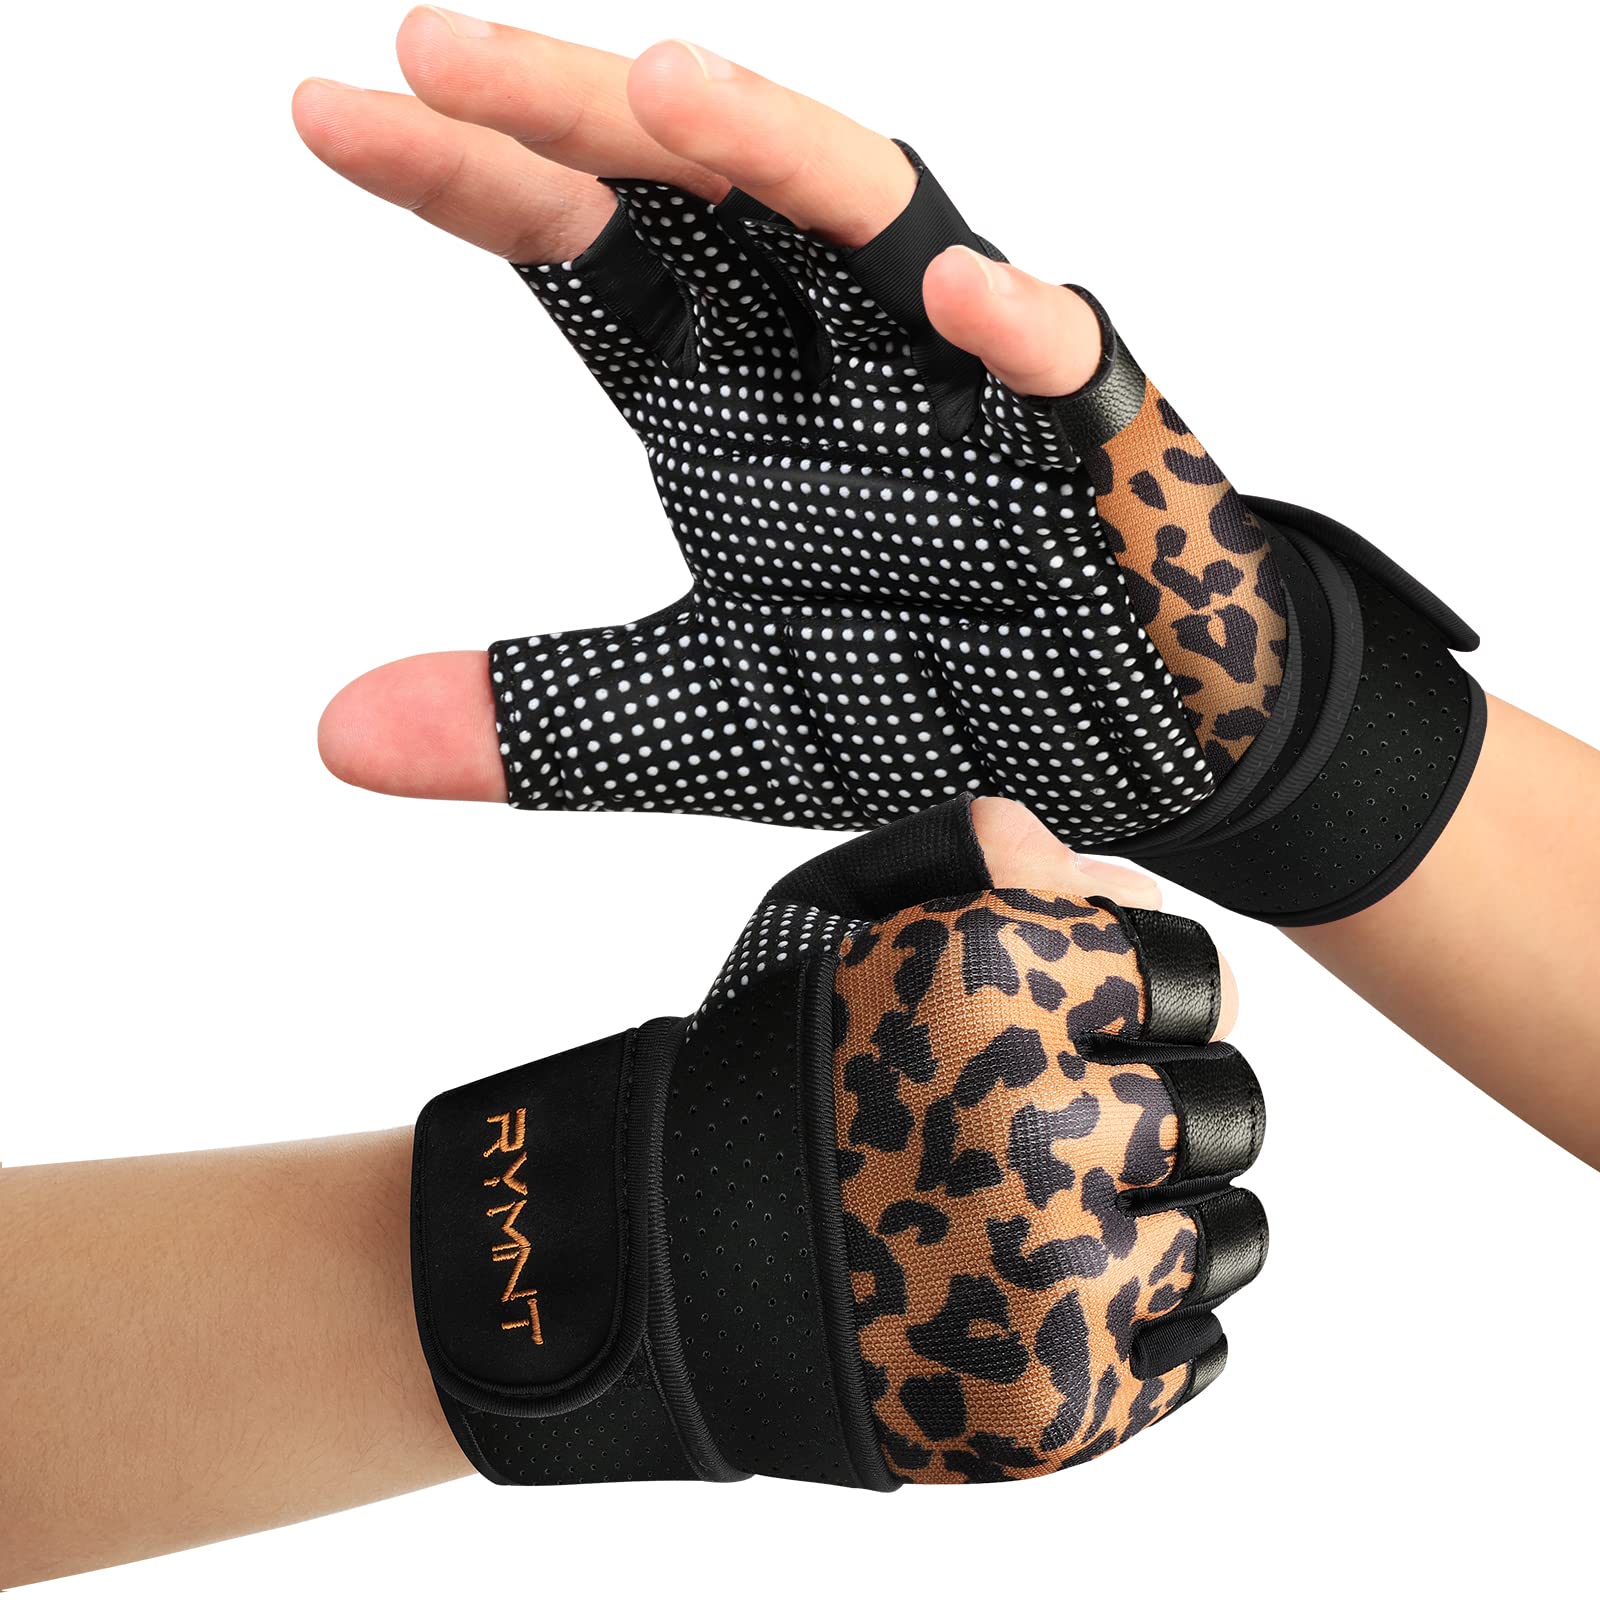 RYMNT Workout Gloves with Wrist Wrap Support, Weight Lifting